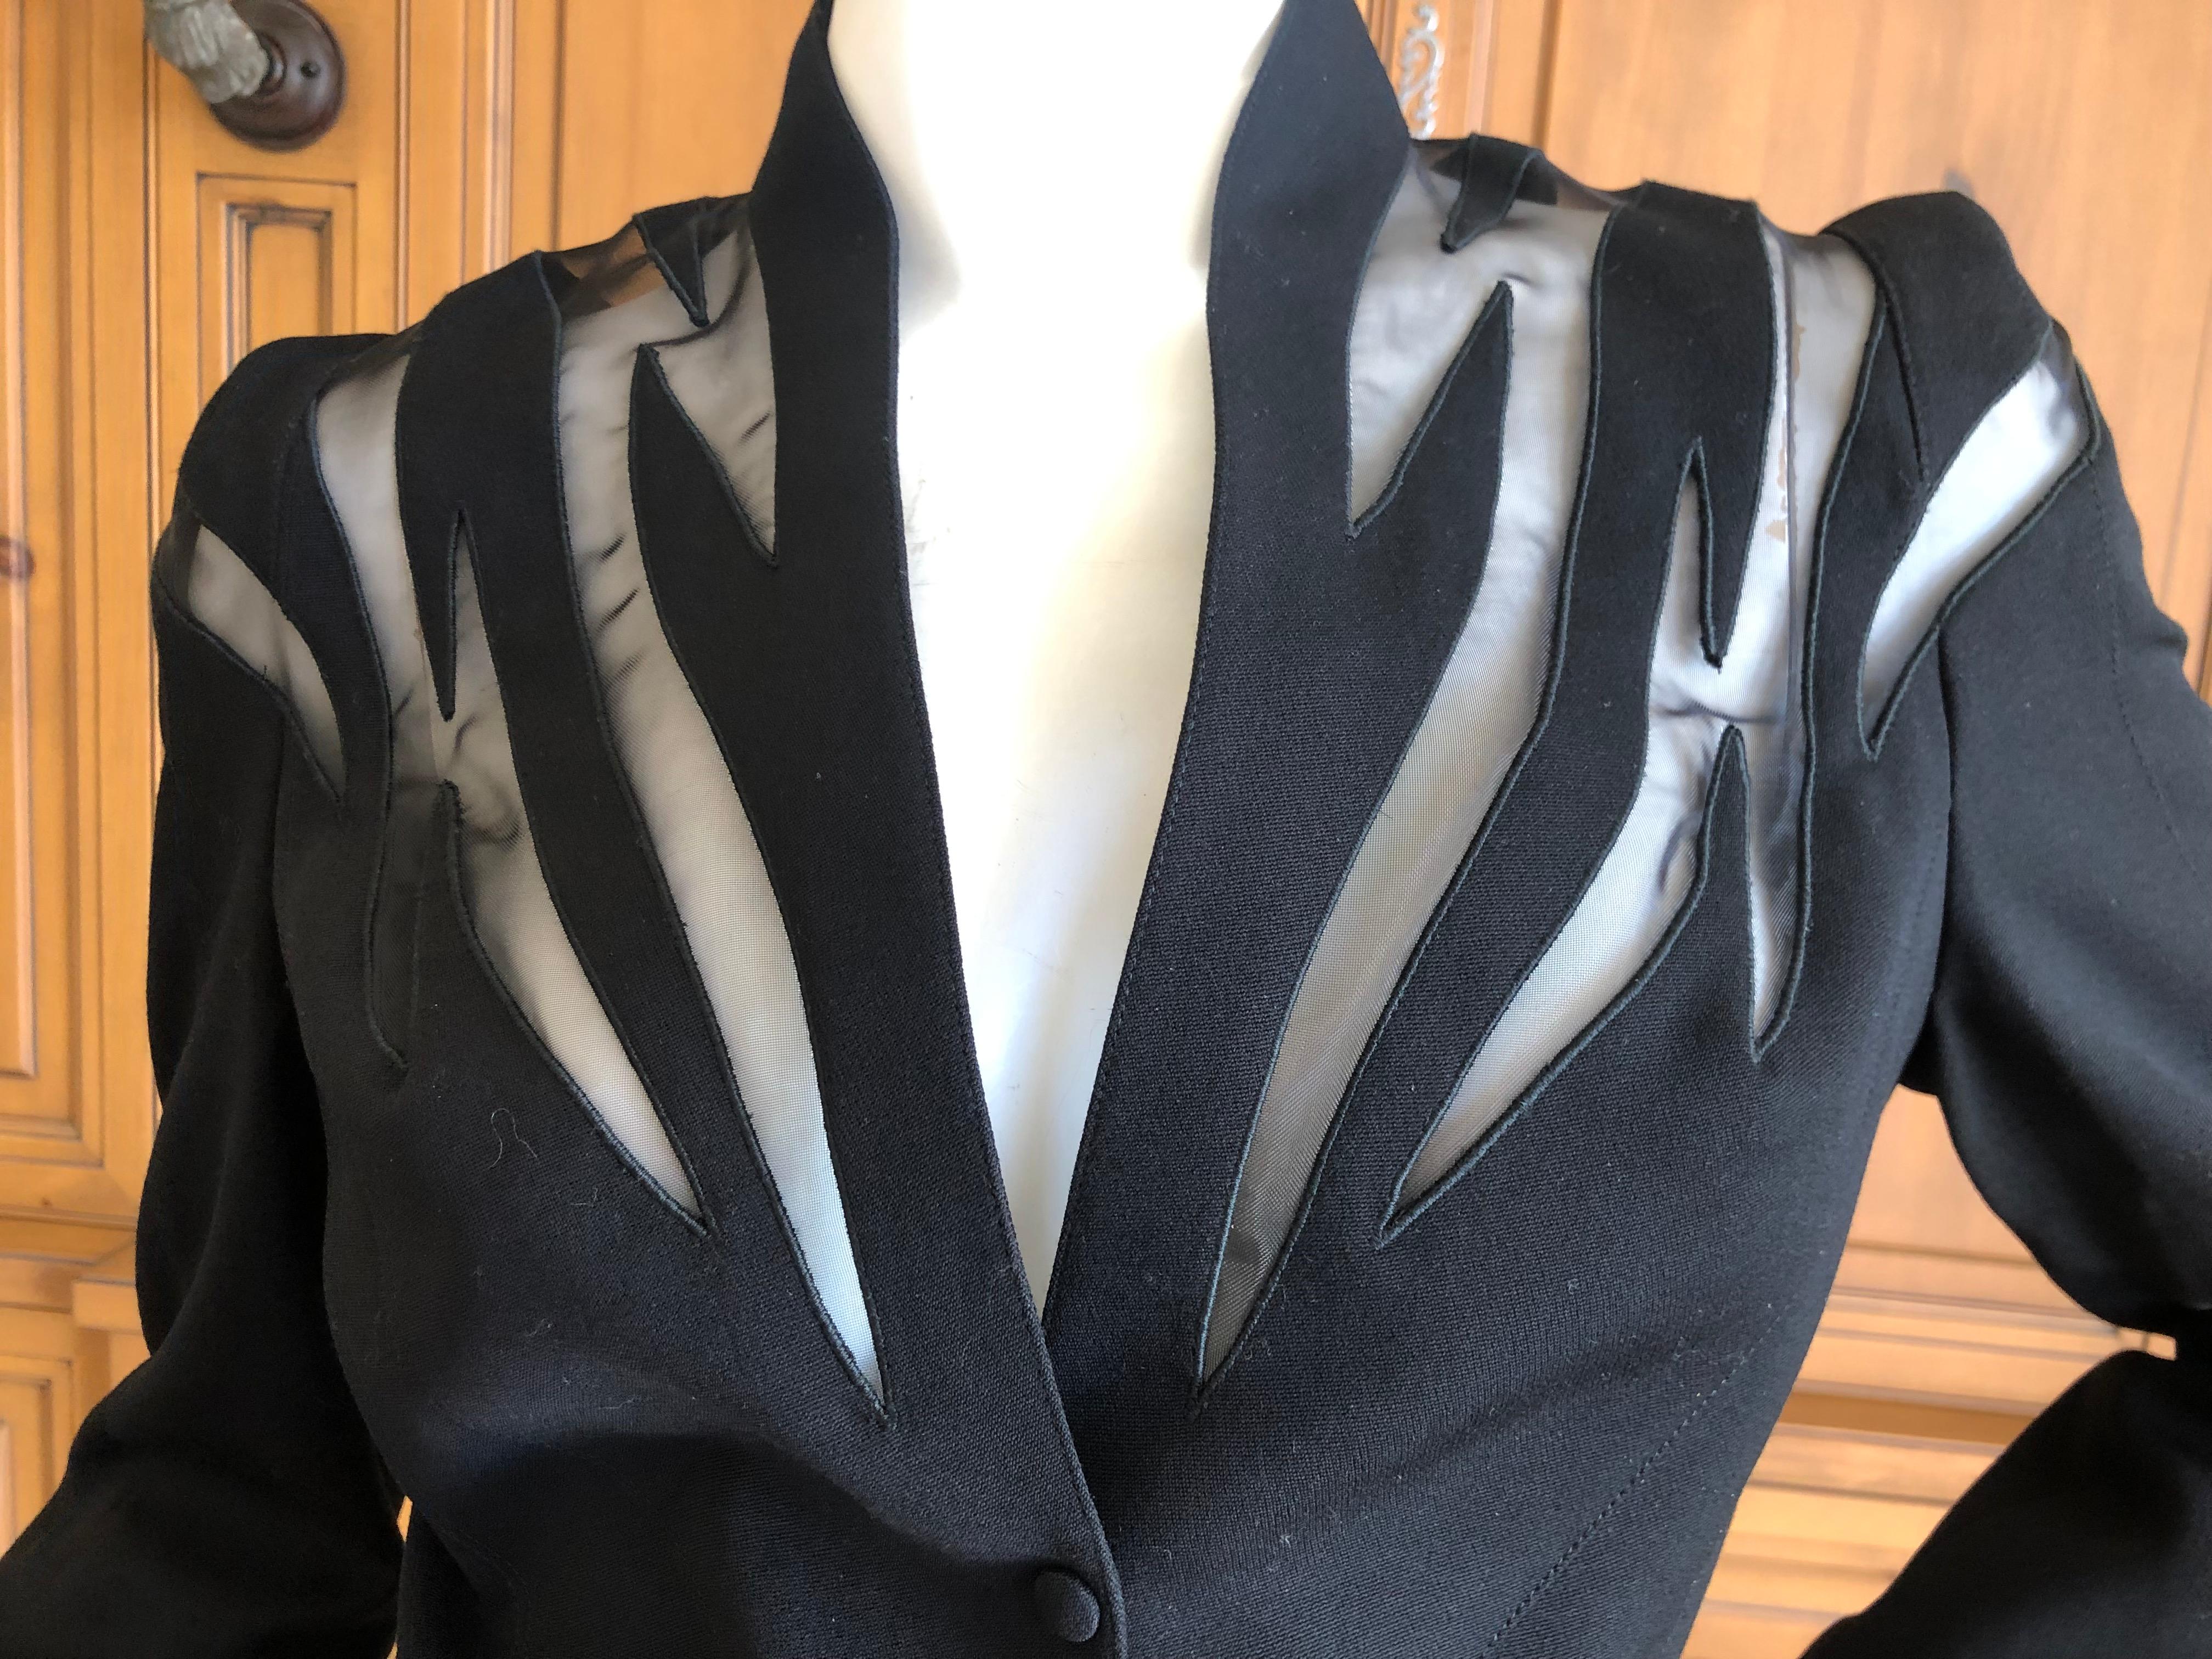 Thierry Mugler Vintage 1980's Black Peplum Suit with Sheer Flame Pattern Details For Sale 4